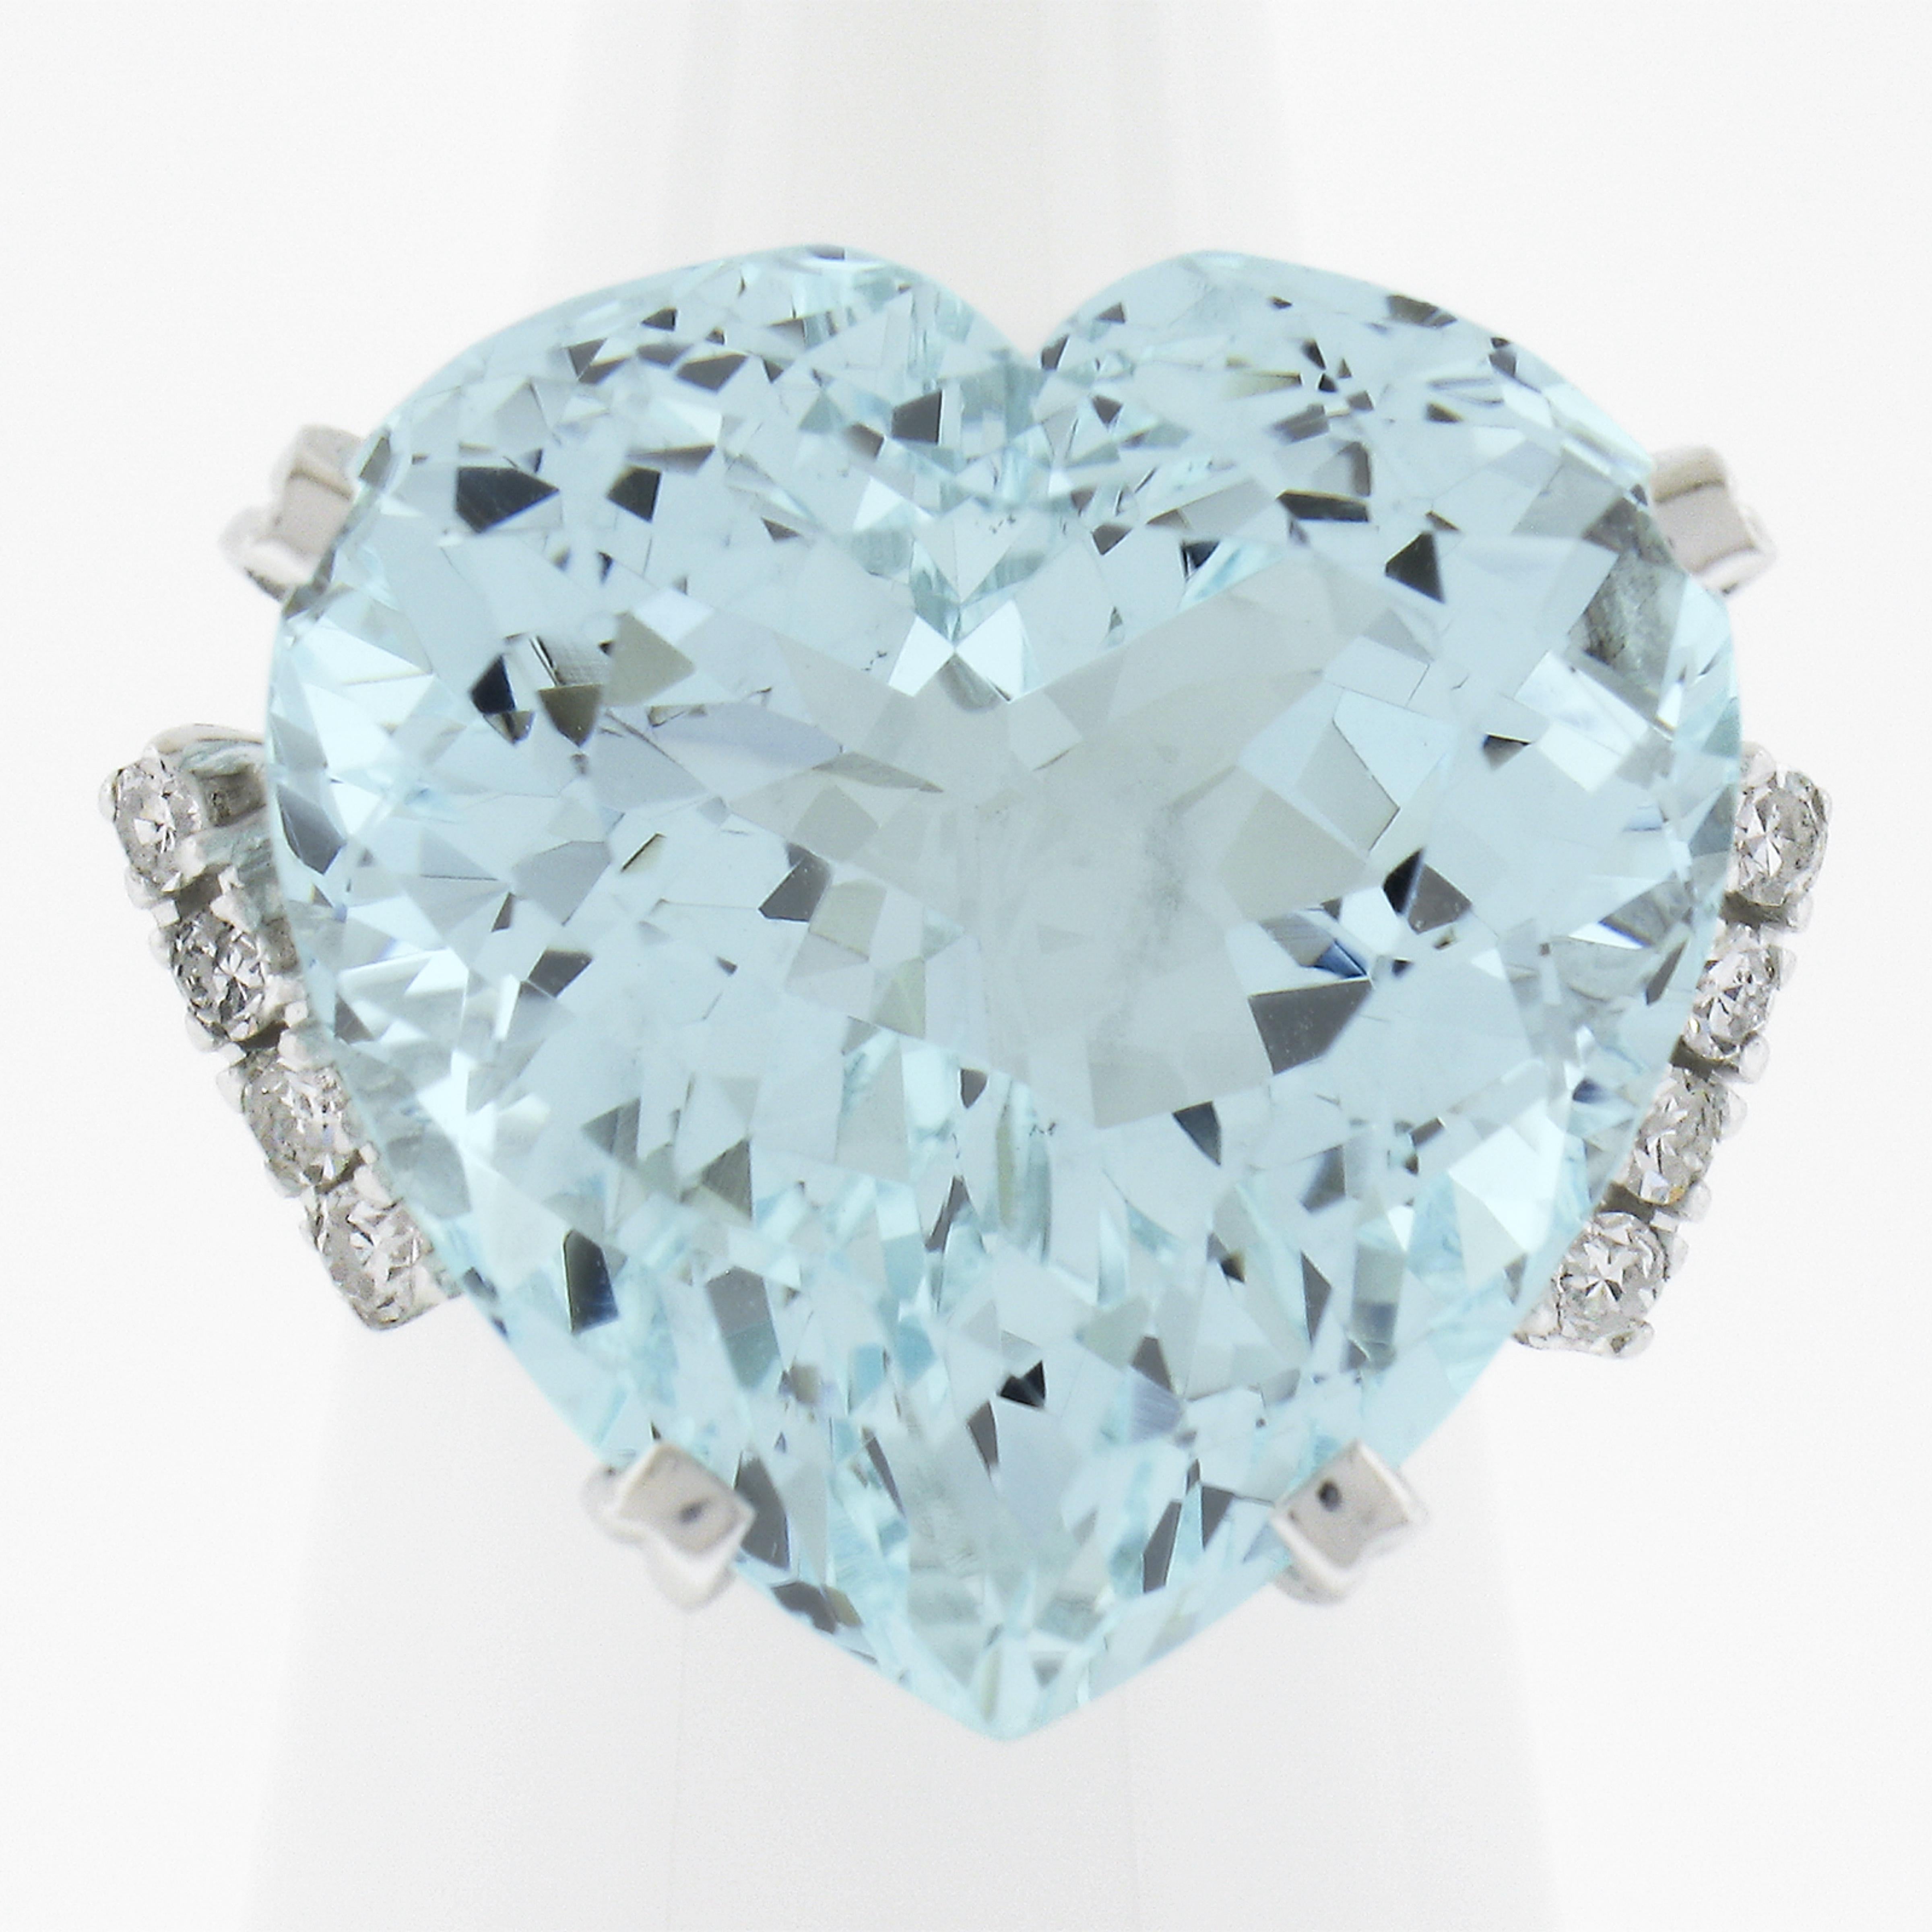 --Stone(s):--
(1) Natural Genuine Aquamarine - Heart Brilliant Cut - Prong Set - Light-Blue Color - 27-30ct (approx. based on GIA measurements)
*See Certification Information Below*
(8) Natural Genuine Diamonds - Old Single Cut - Prong Set -  0.20tw